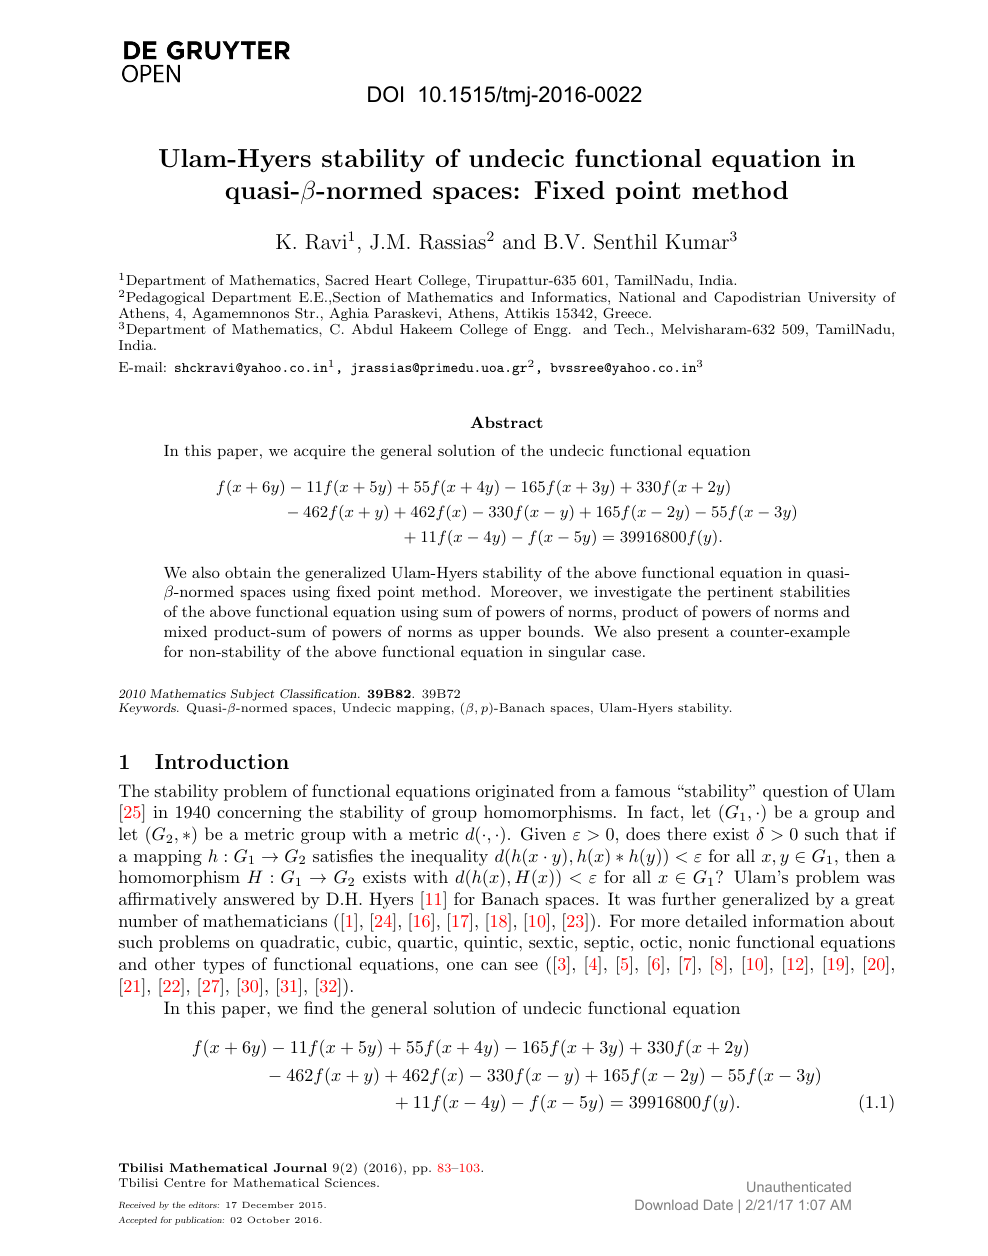 Ulam Hyers Stability Of Undecic Functional Equation In Quasi B Normed Spaces Fixed Point Method Topic Of Research Paper In Mathematics Download Scholarly Article Pdf And Read For Free On Cyberleninka Open Science Hub